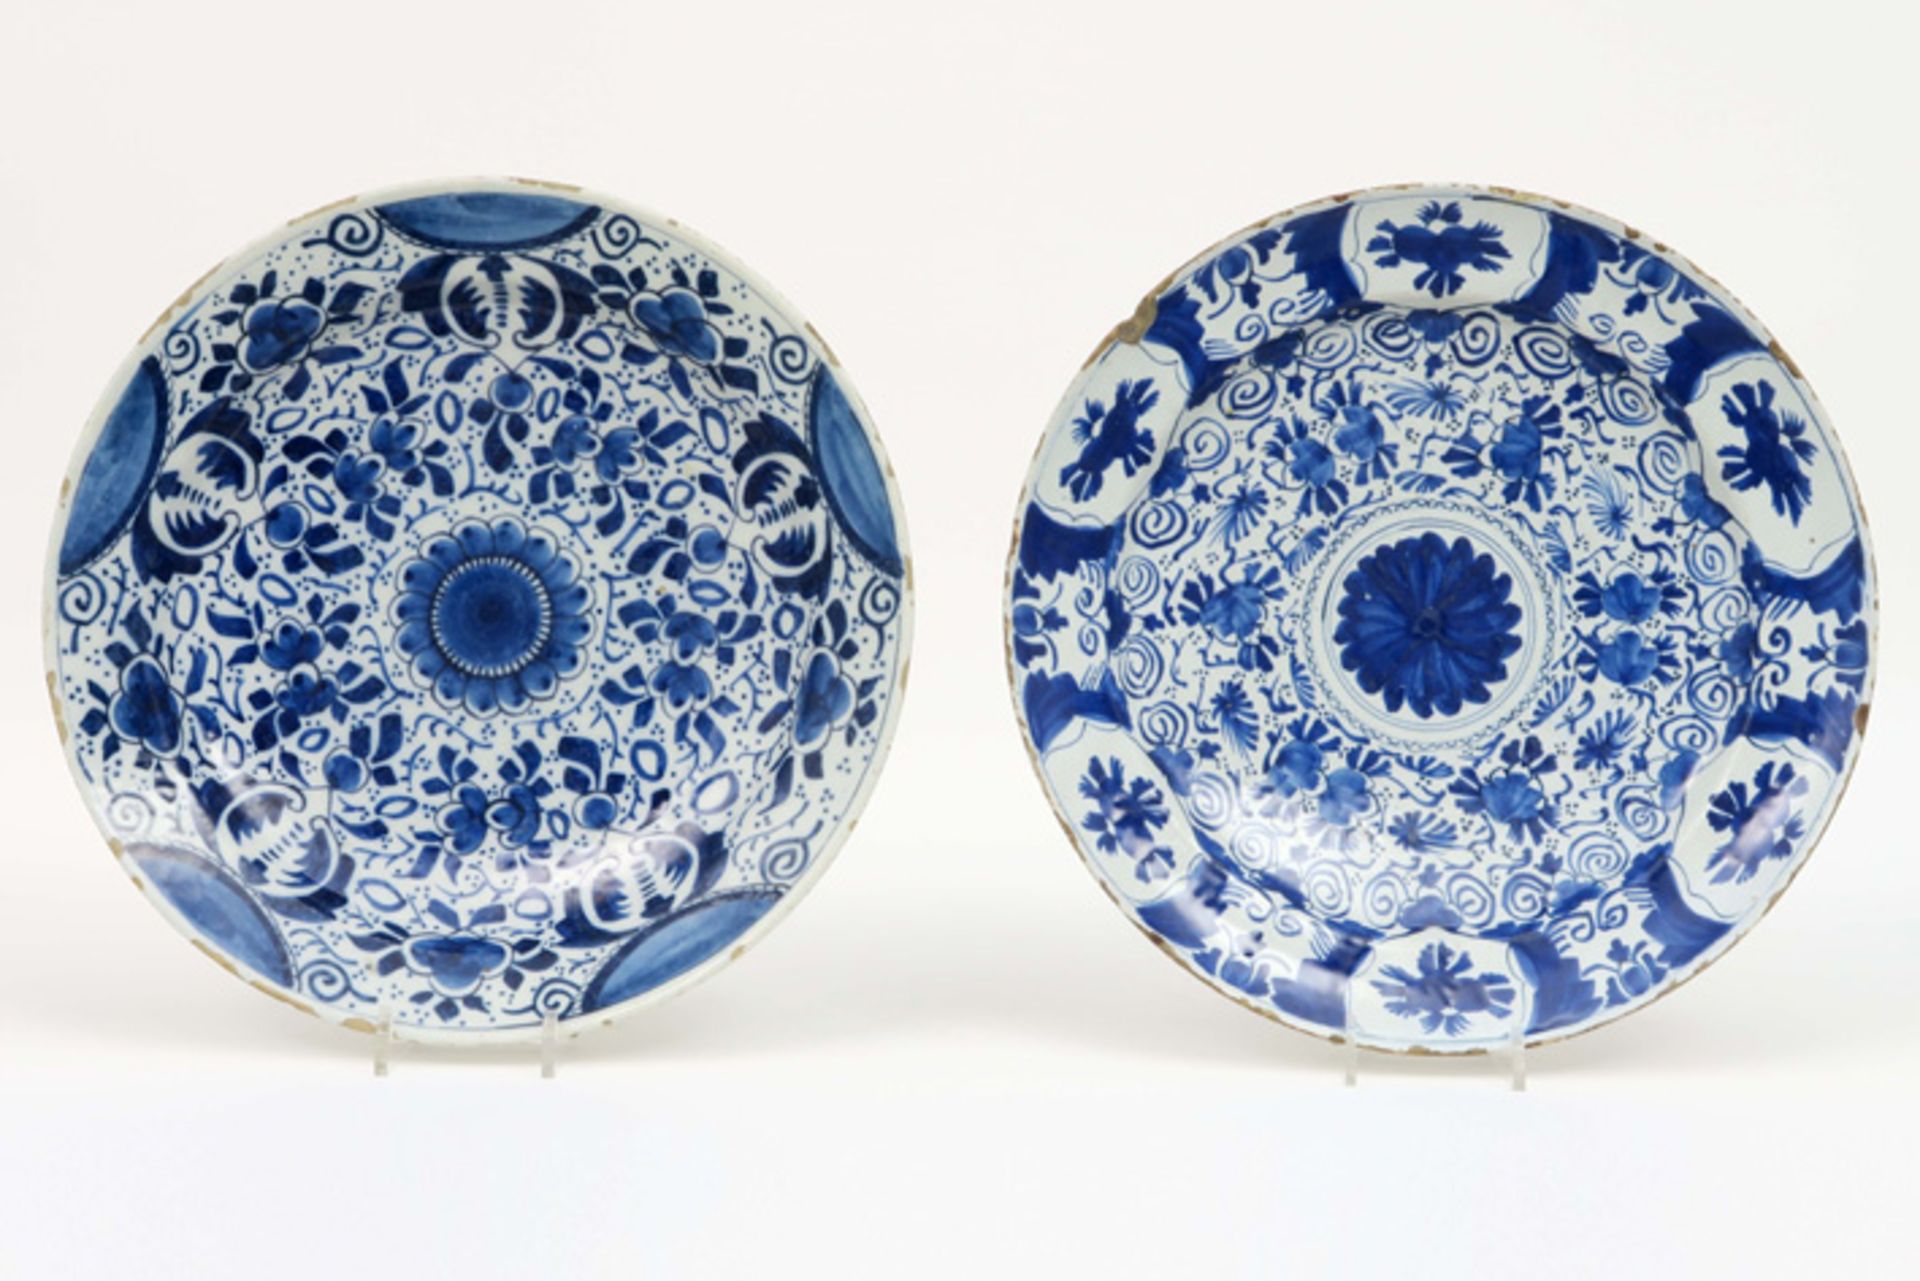 pair of quite large round 18th Cent. dishes in ceramic from Delft with a blue-white flower decor||